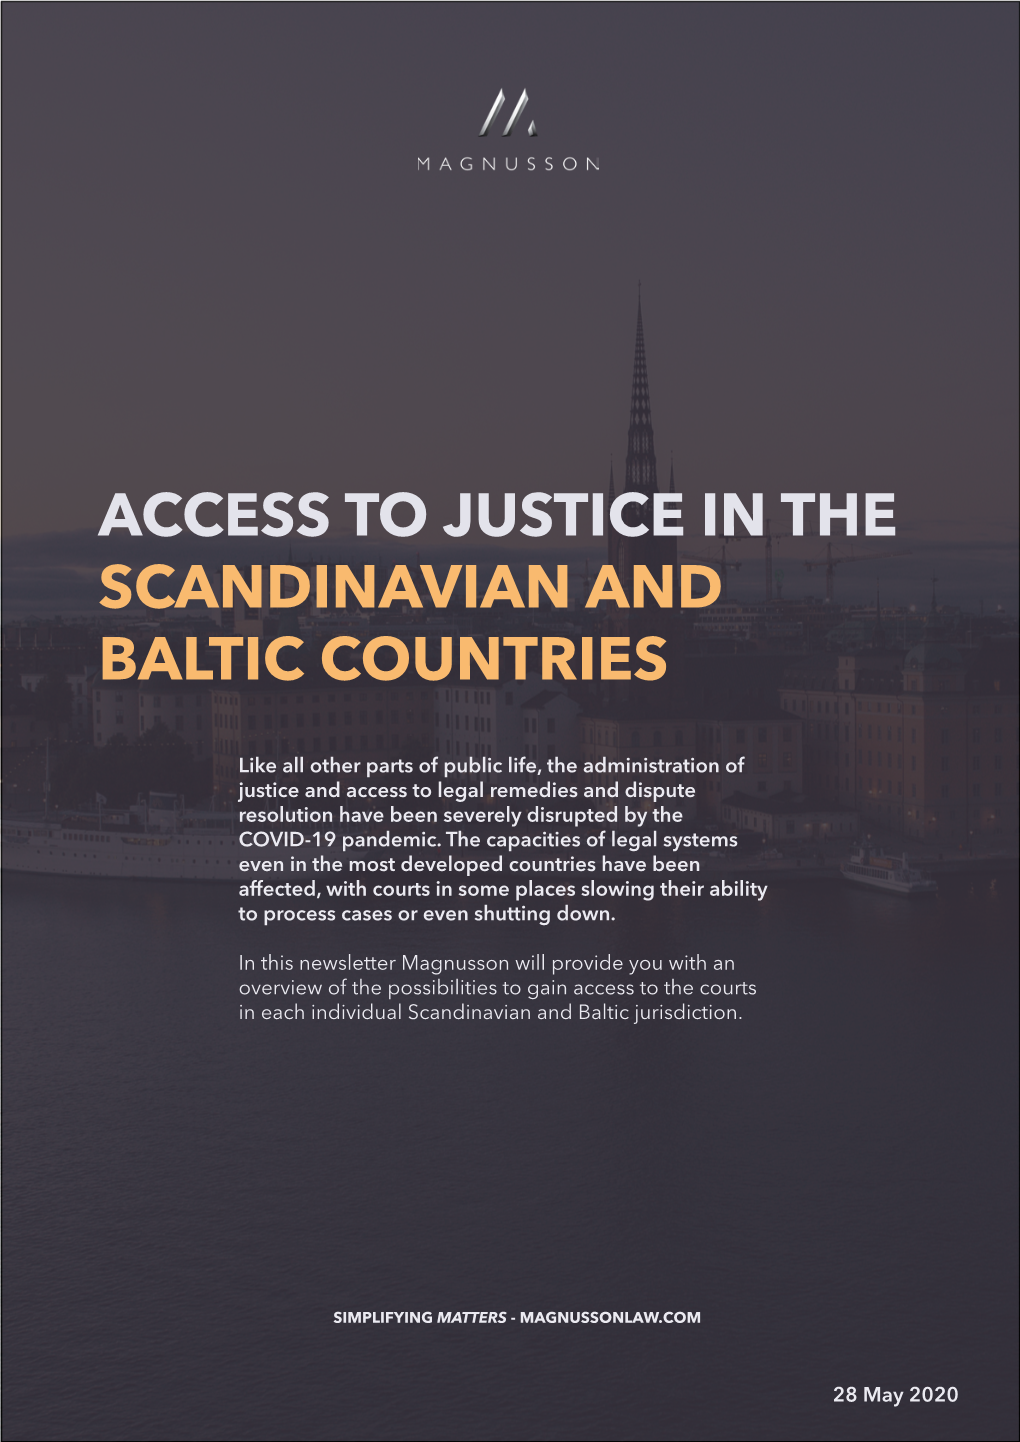 Access to Justice in the Scandinavian and Baltic Countries